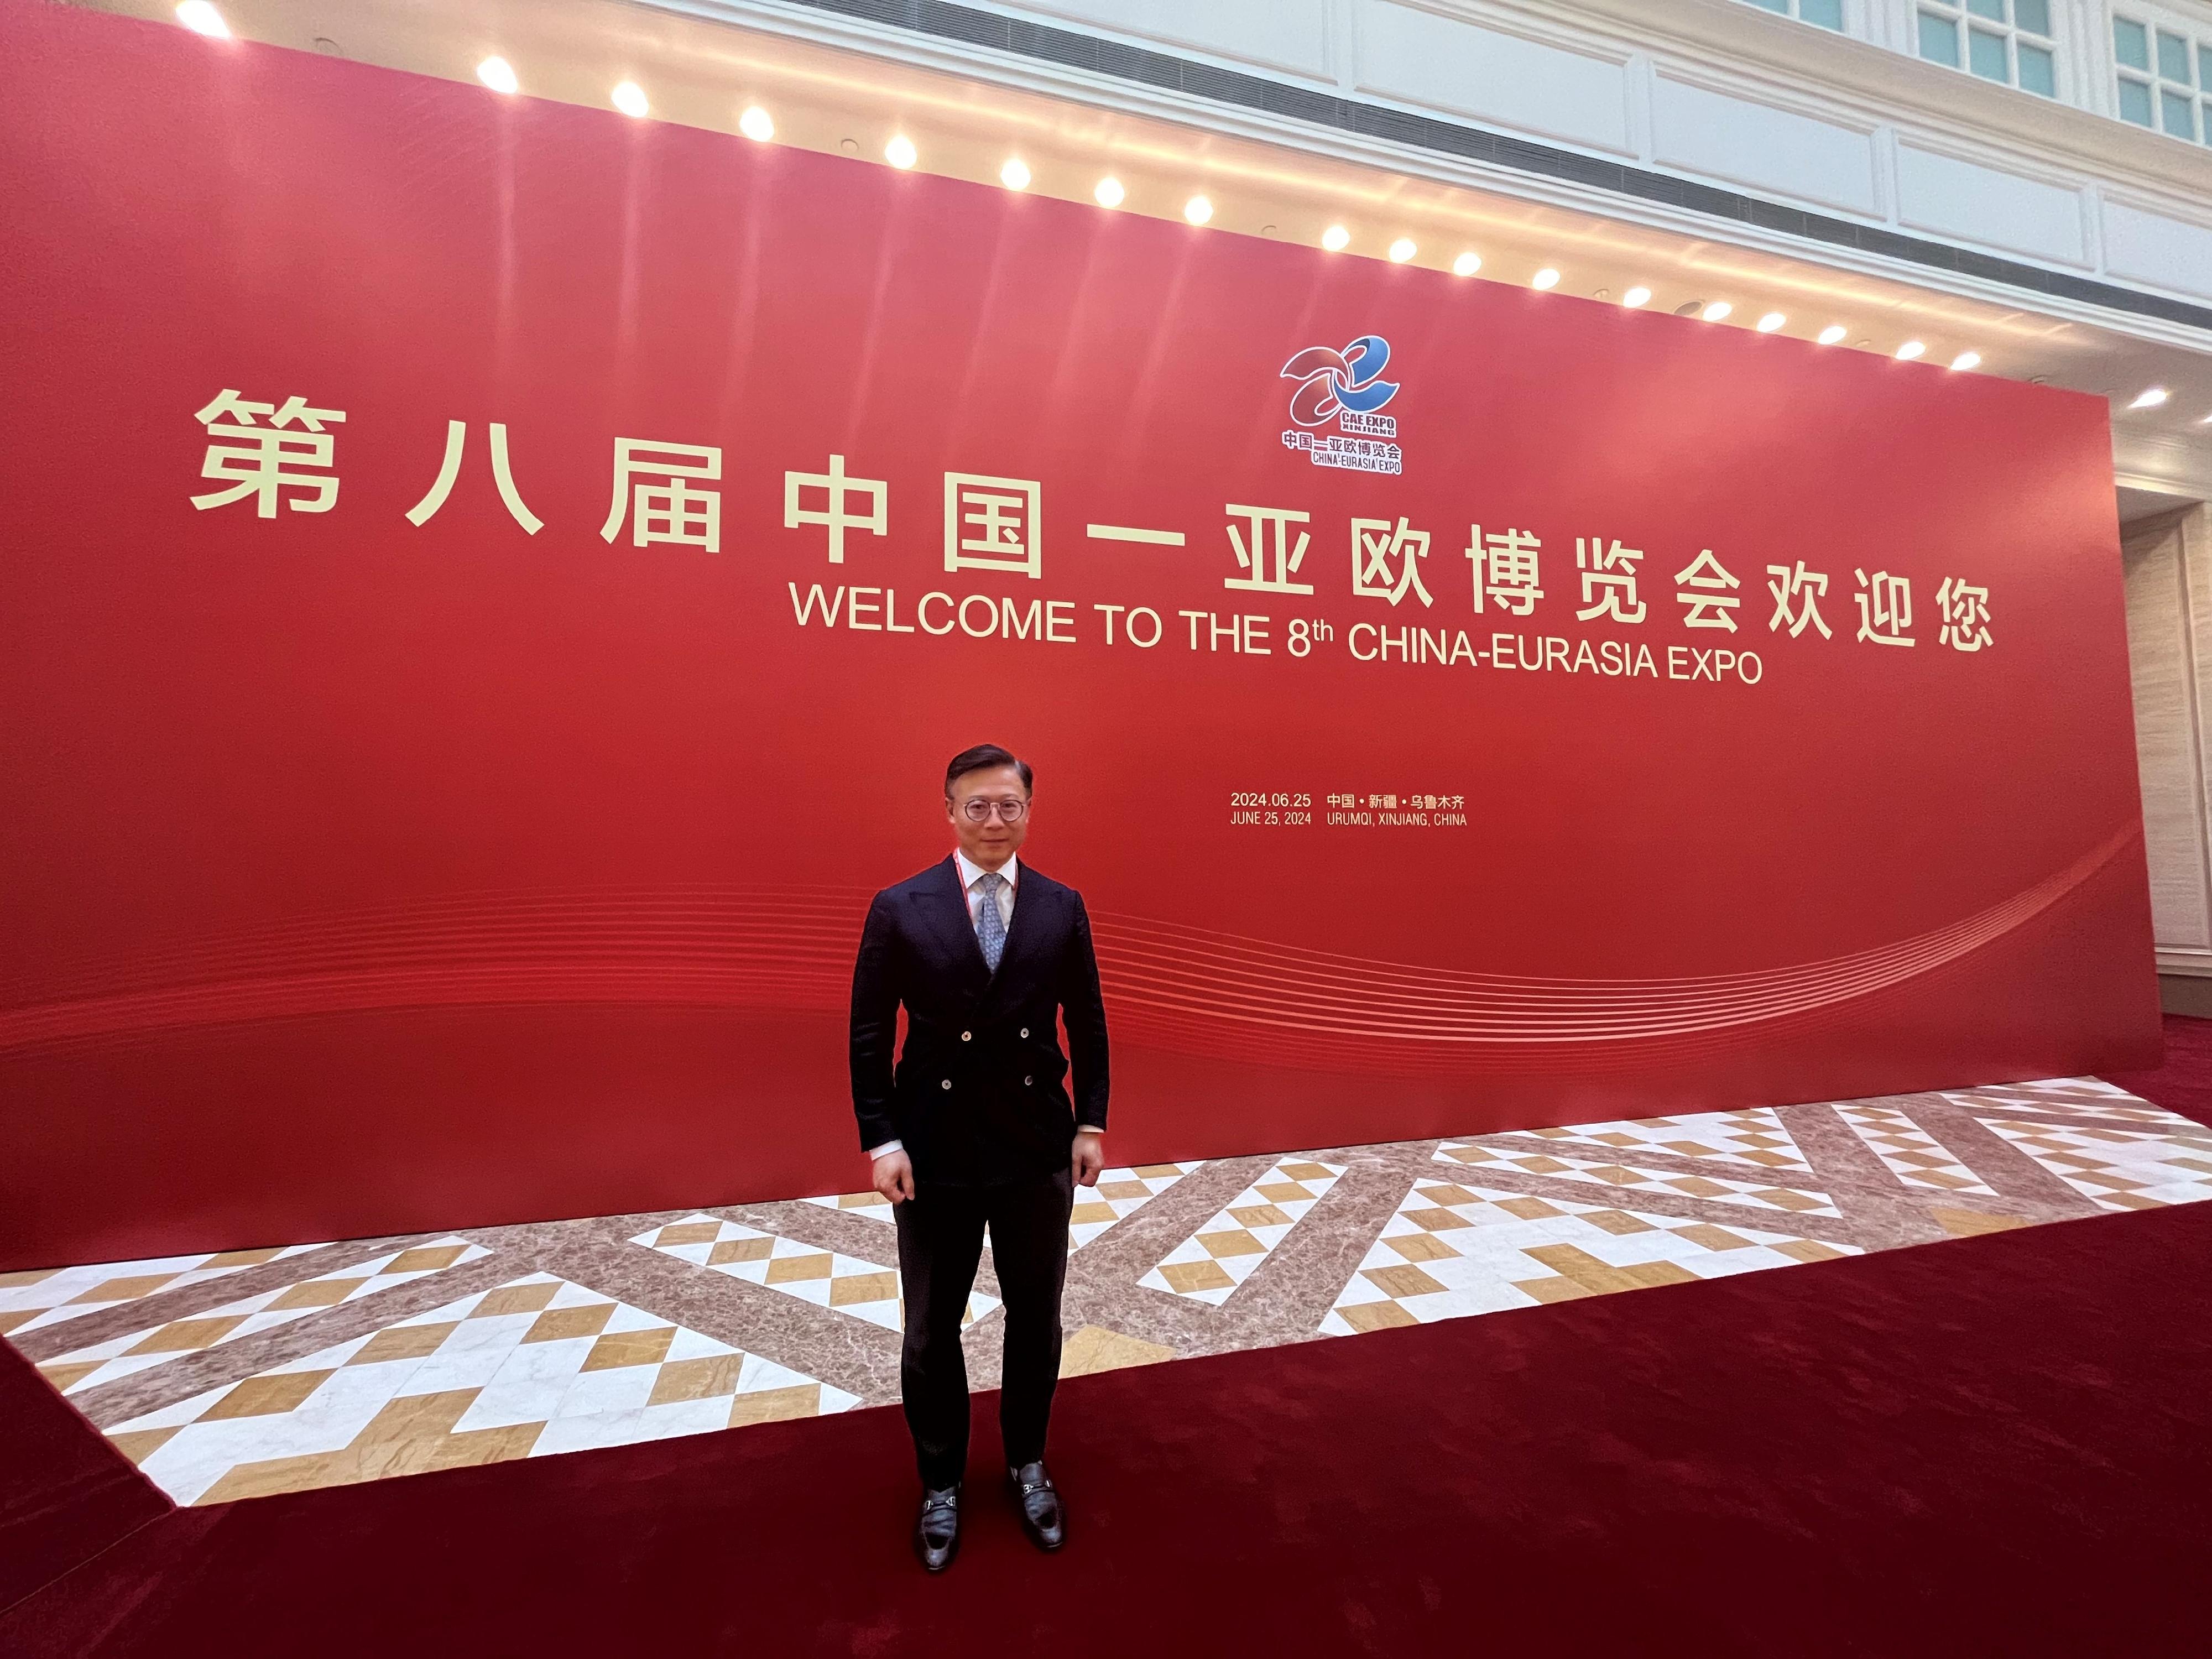 The Deputy Secretary for Justice, Mr Cheung Kwok-kwan, today (June 26) attended the 8th China-Eurasia Expo in Urumqi, Xinjiang. Photo shows Mr Cheung attending a welcome dinner upon his arrival yesterday (June 25).